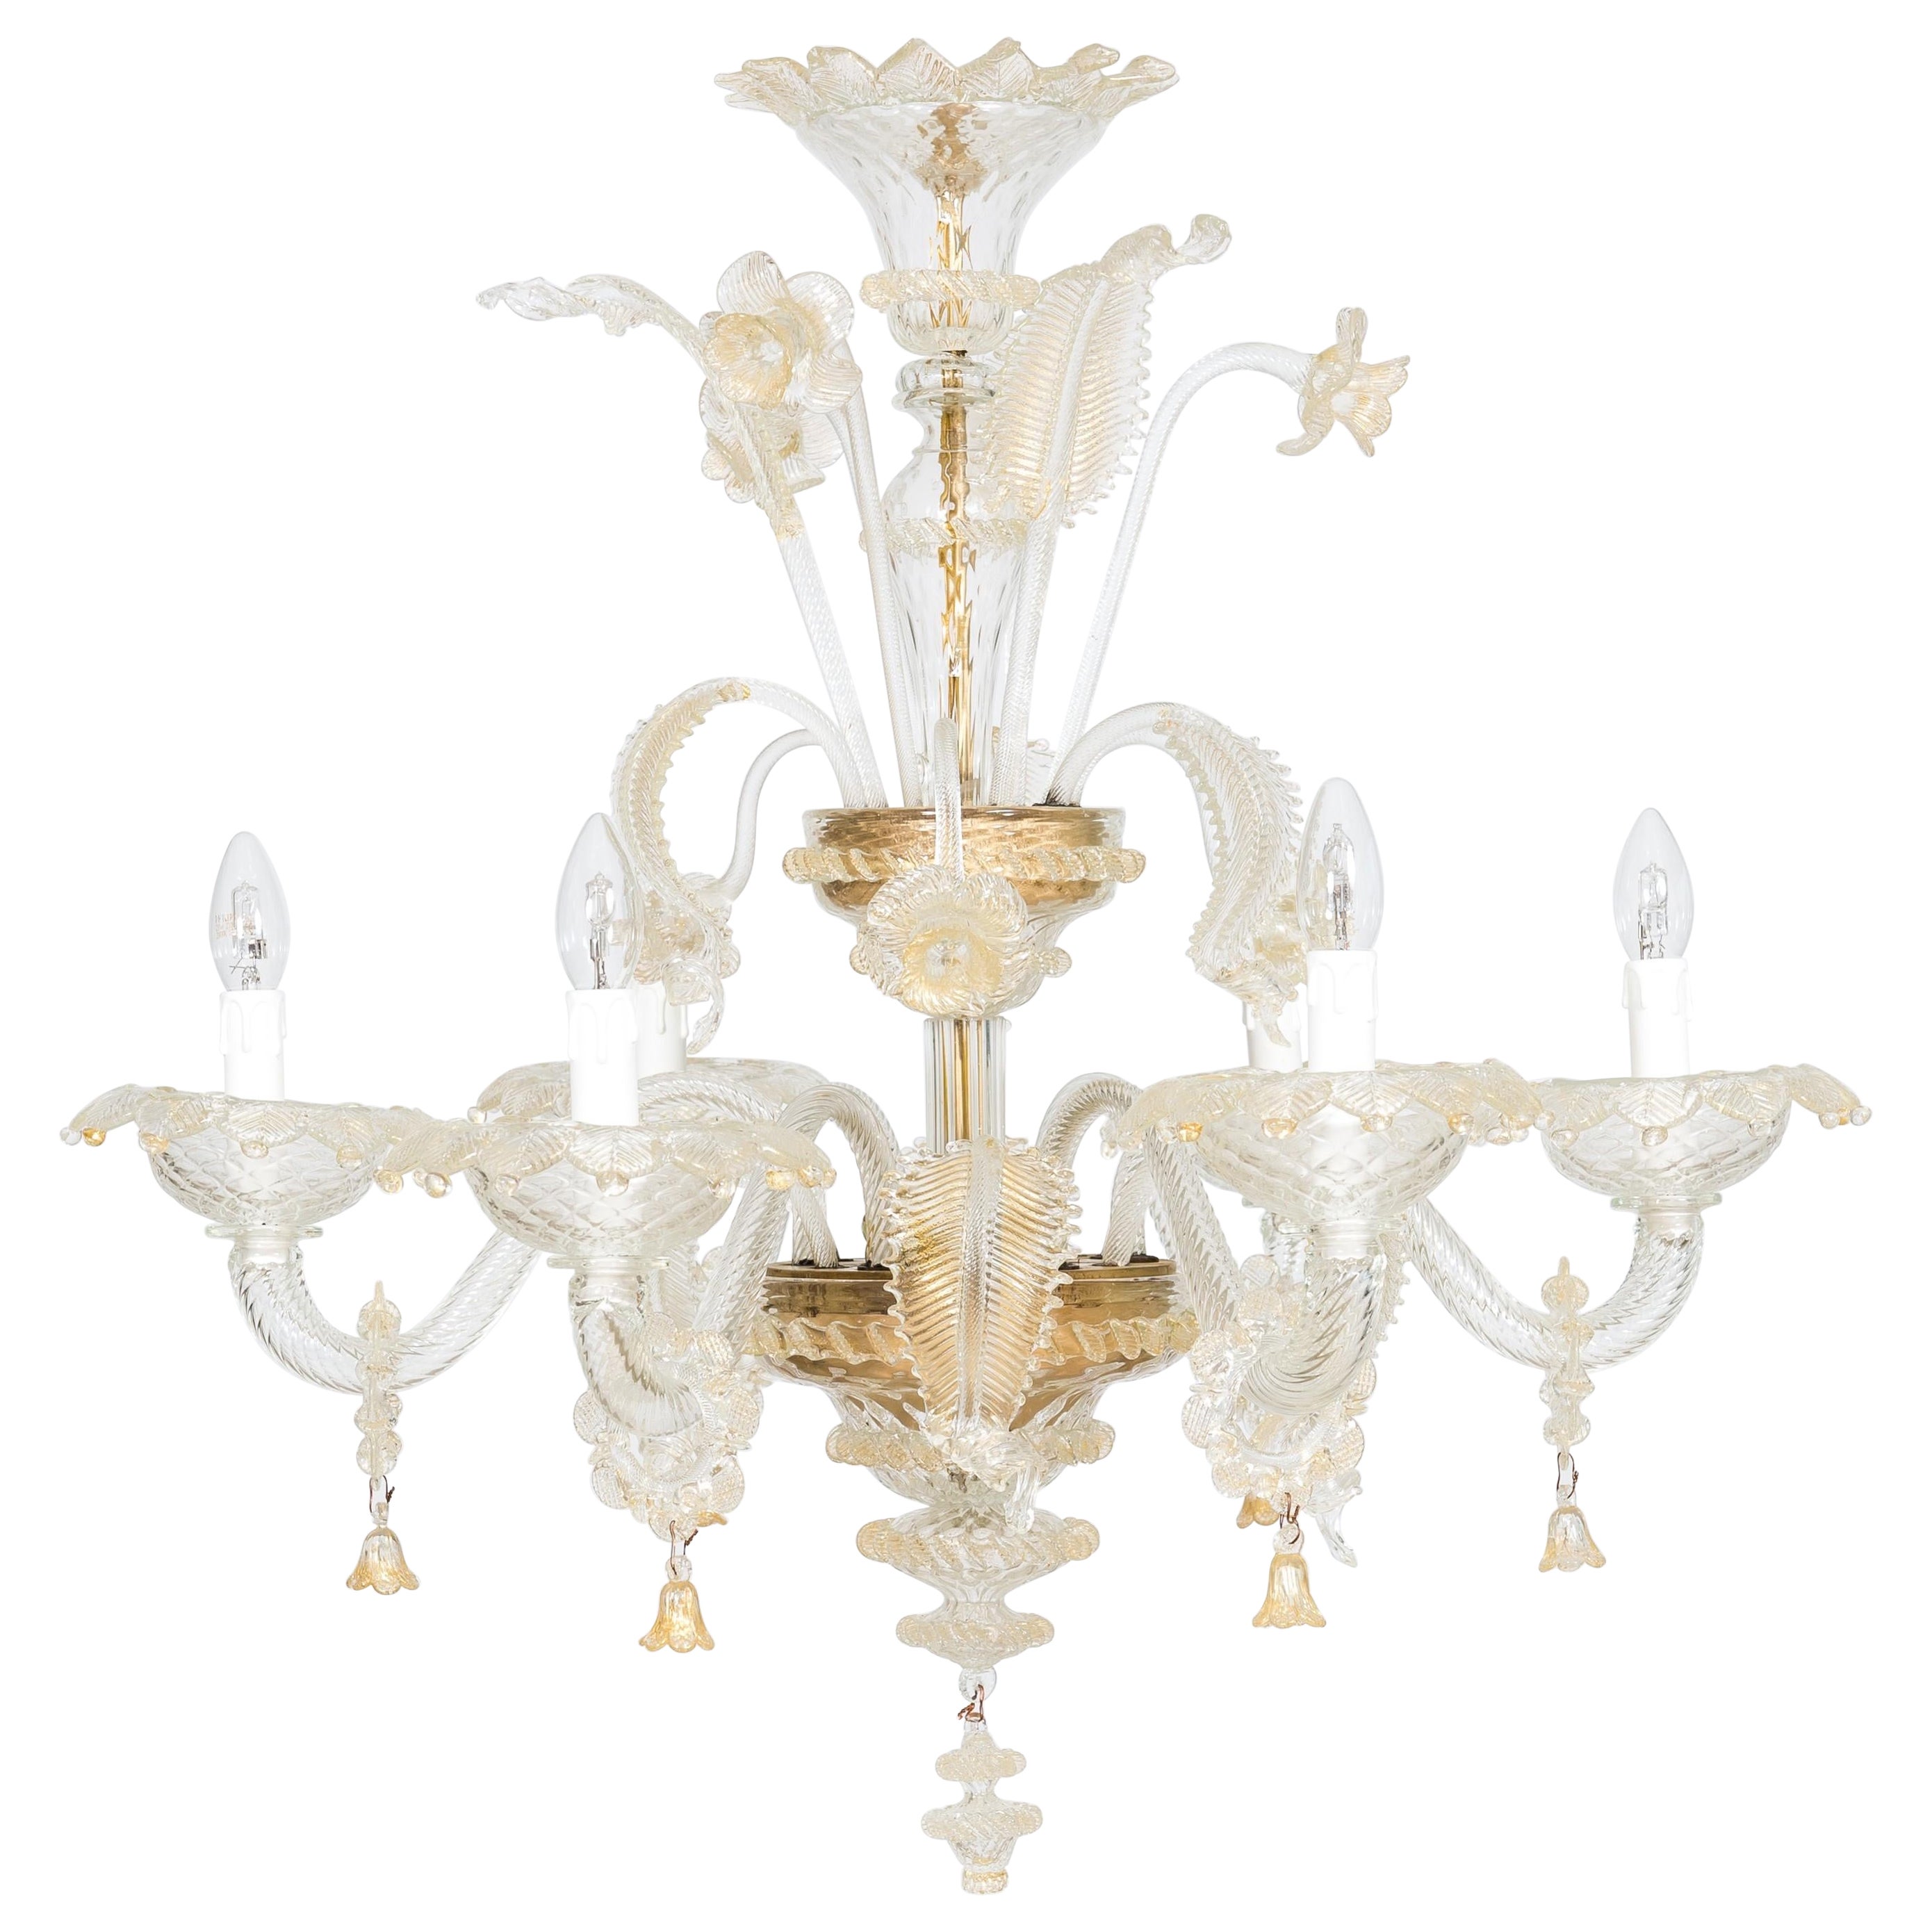 Floral Murano Glass Chandelier with “Riga Dritta” Decorations, 20th Century